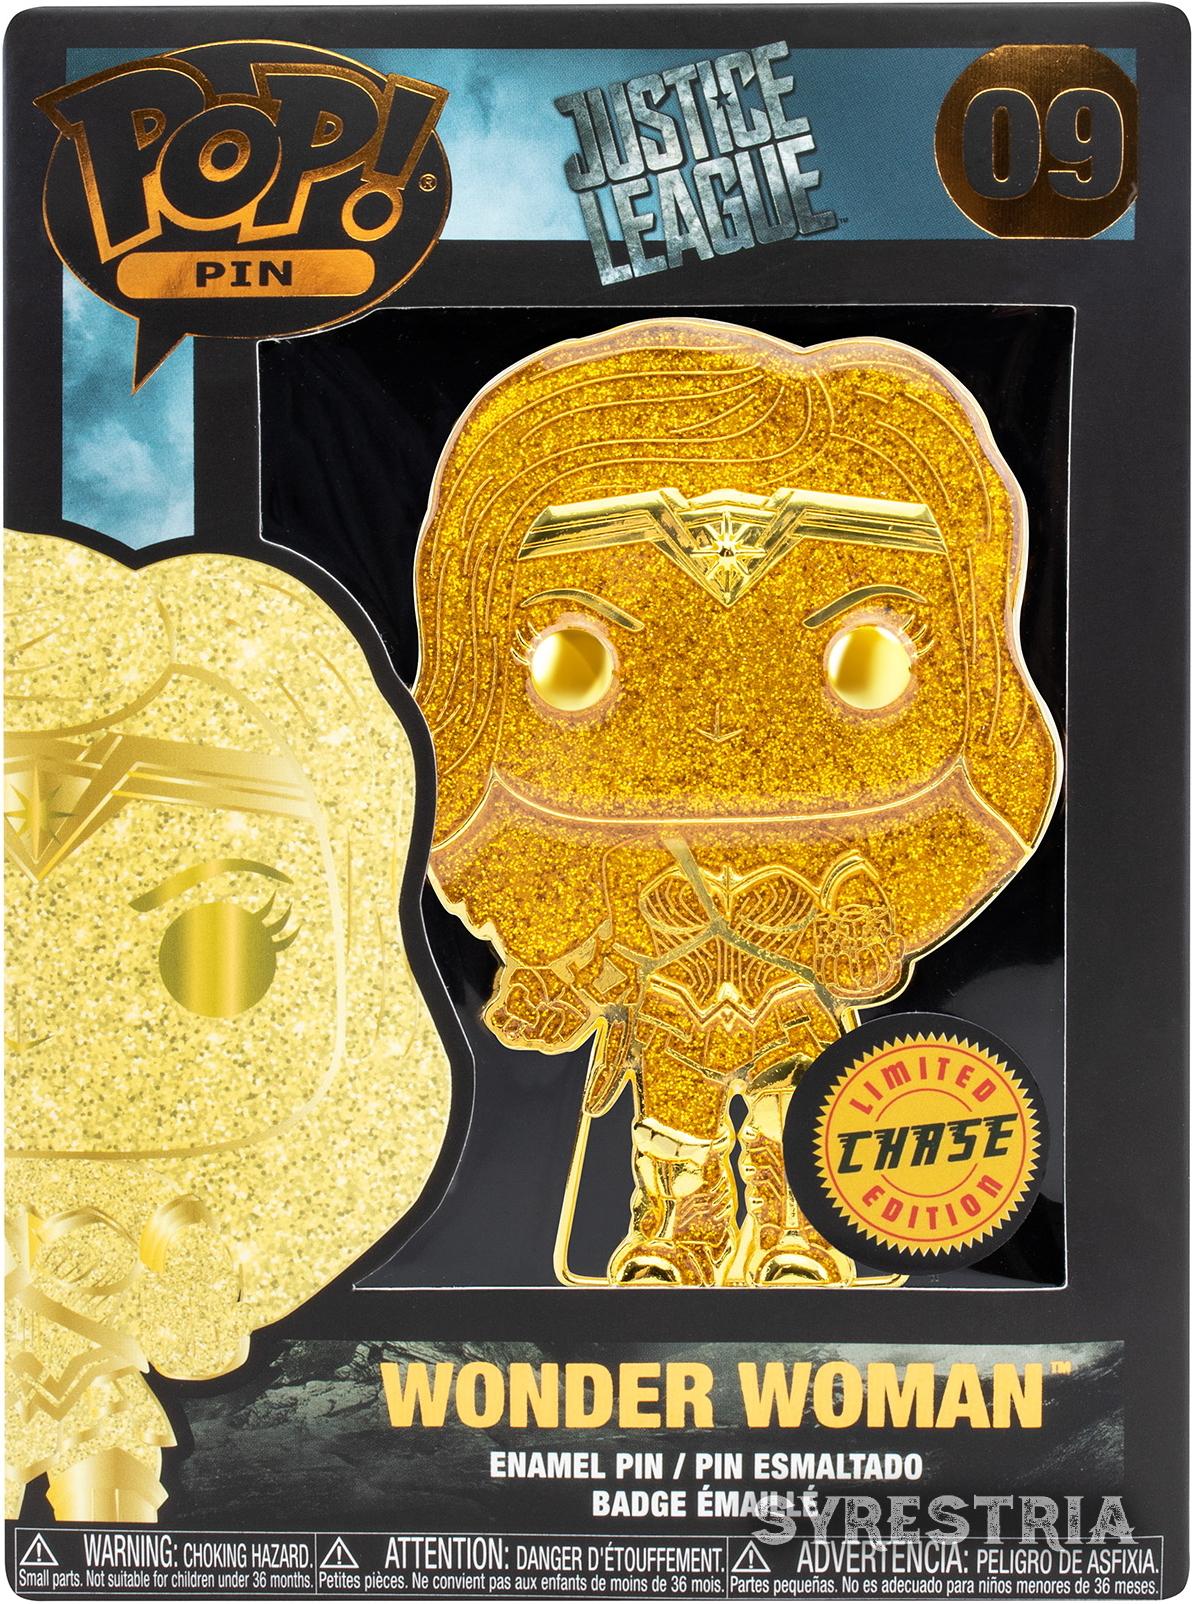 Justice League - Wonder Woman 09 Limited Chase Edition - Funko Pin